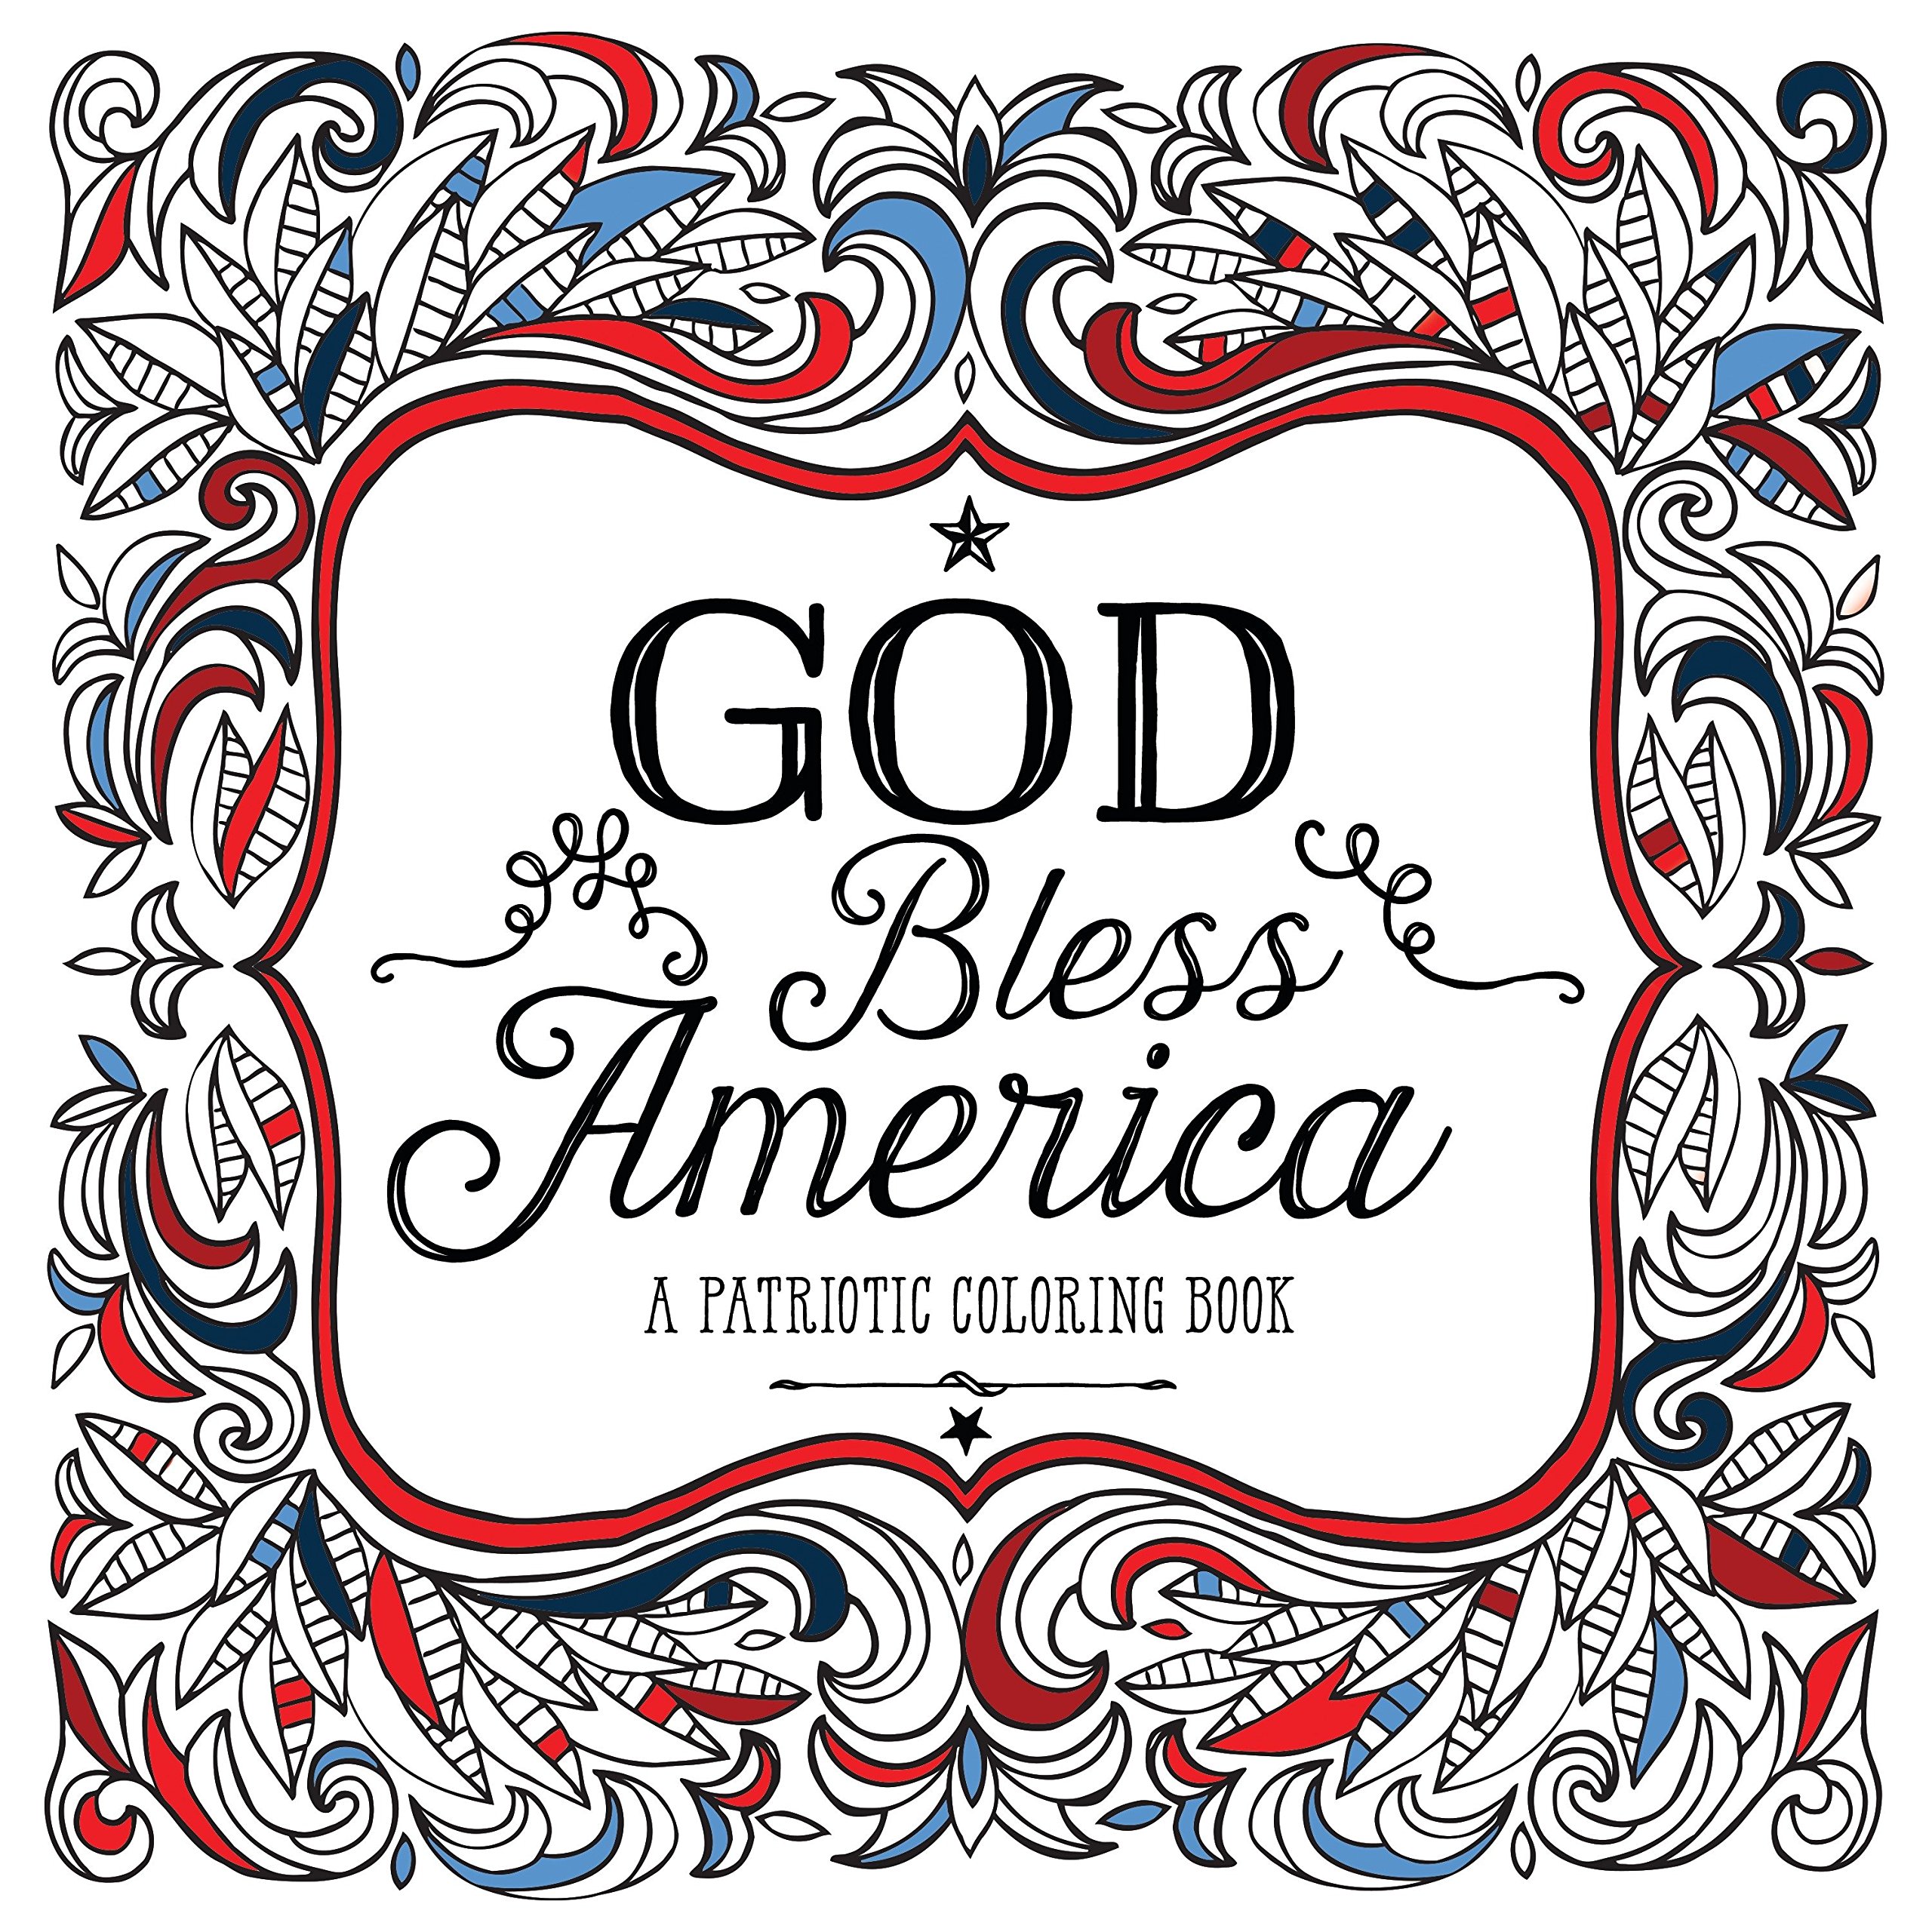 God Bless America: A Patriotic Coloring Book - all things faithful